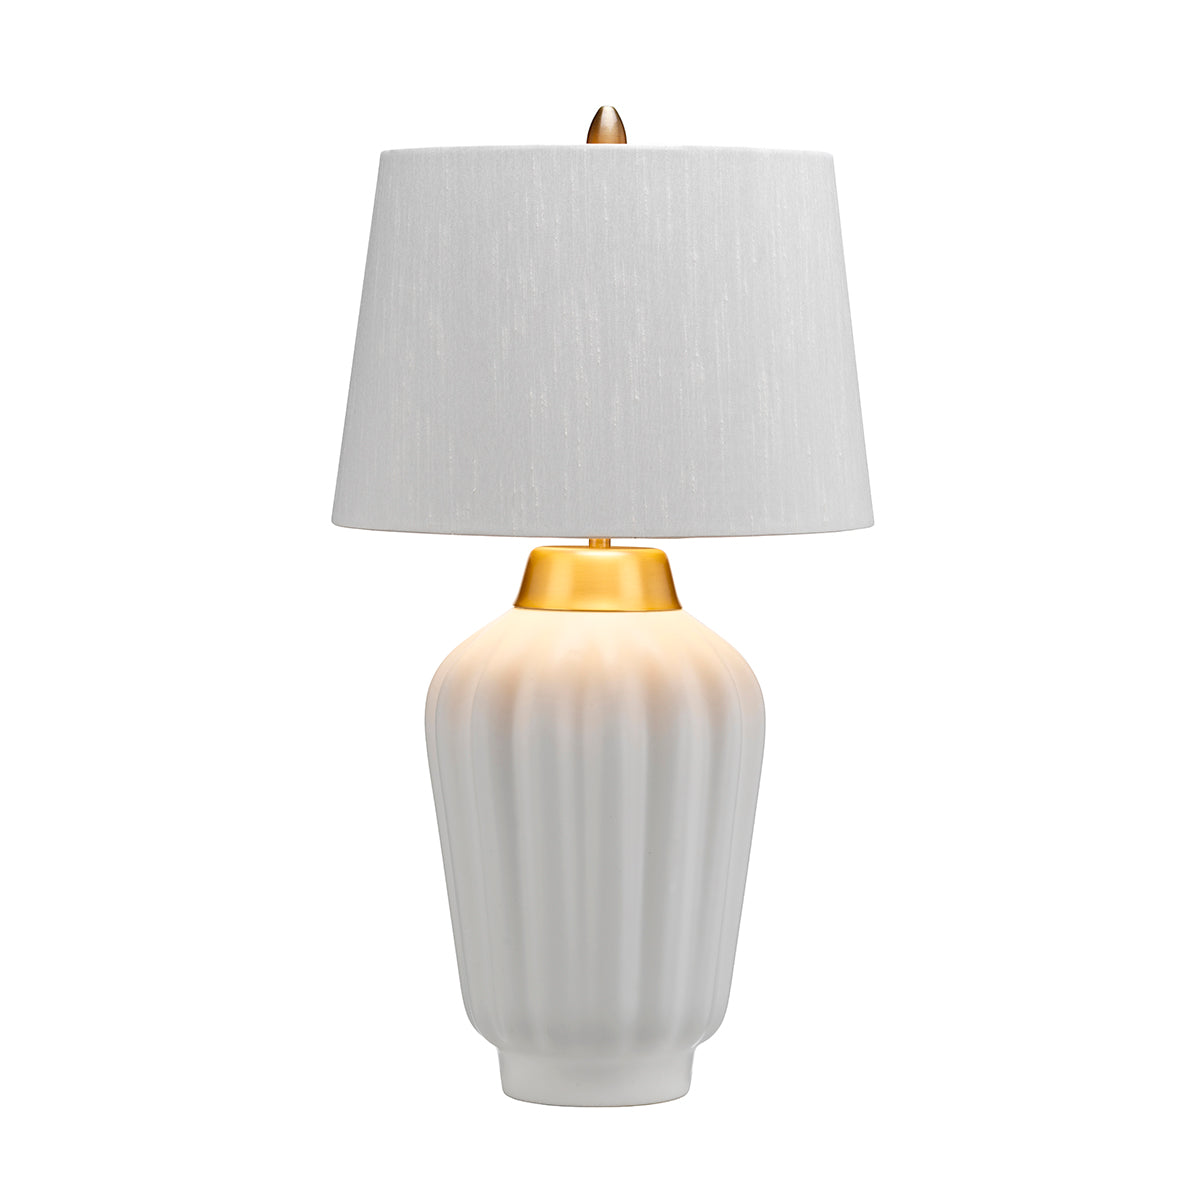 Bexley 1 Light Table Lamp - White & Brushed Brass - Quintiesse Lighting